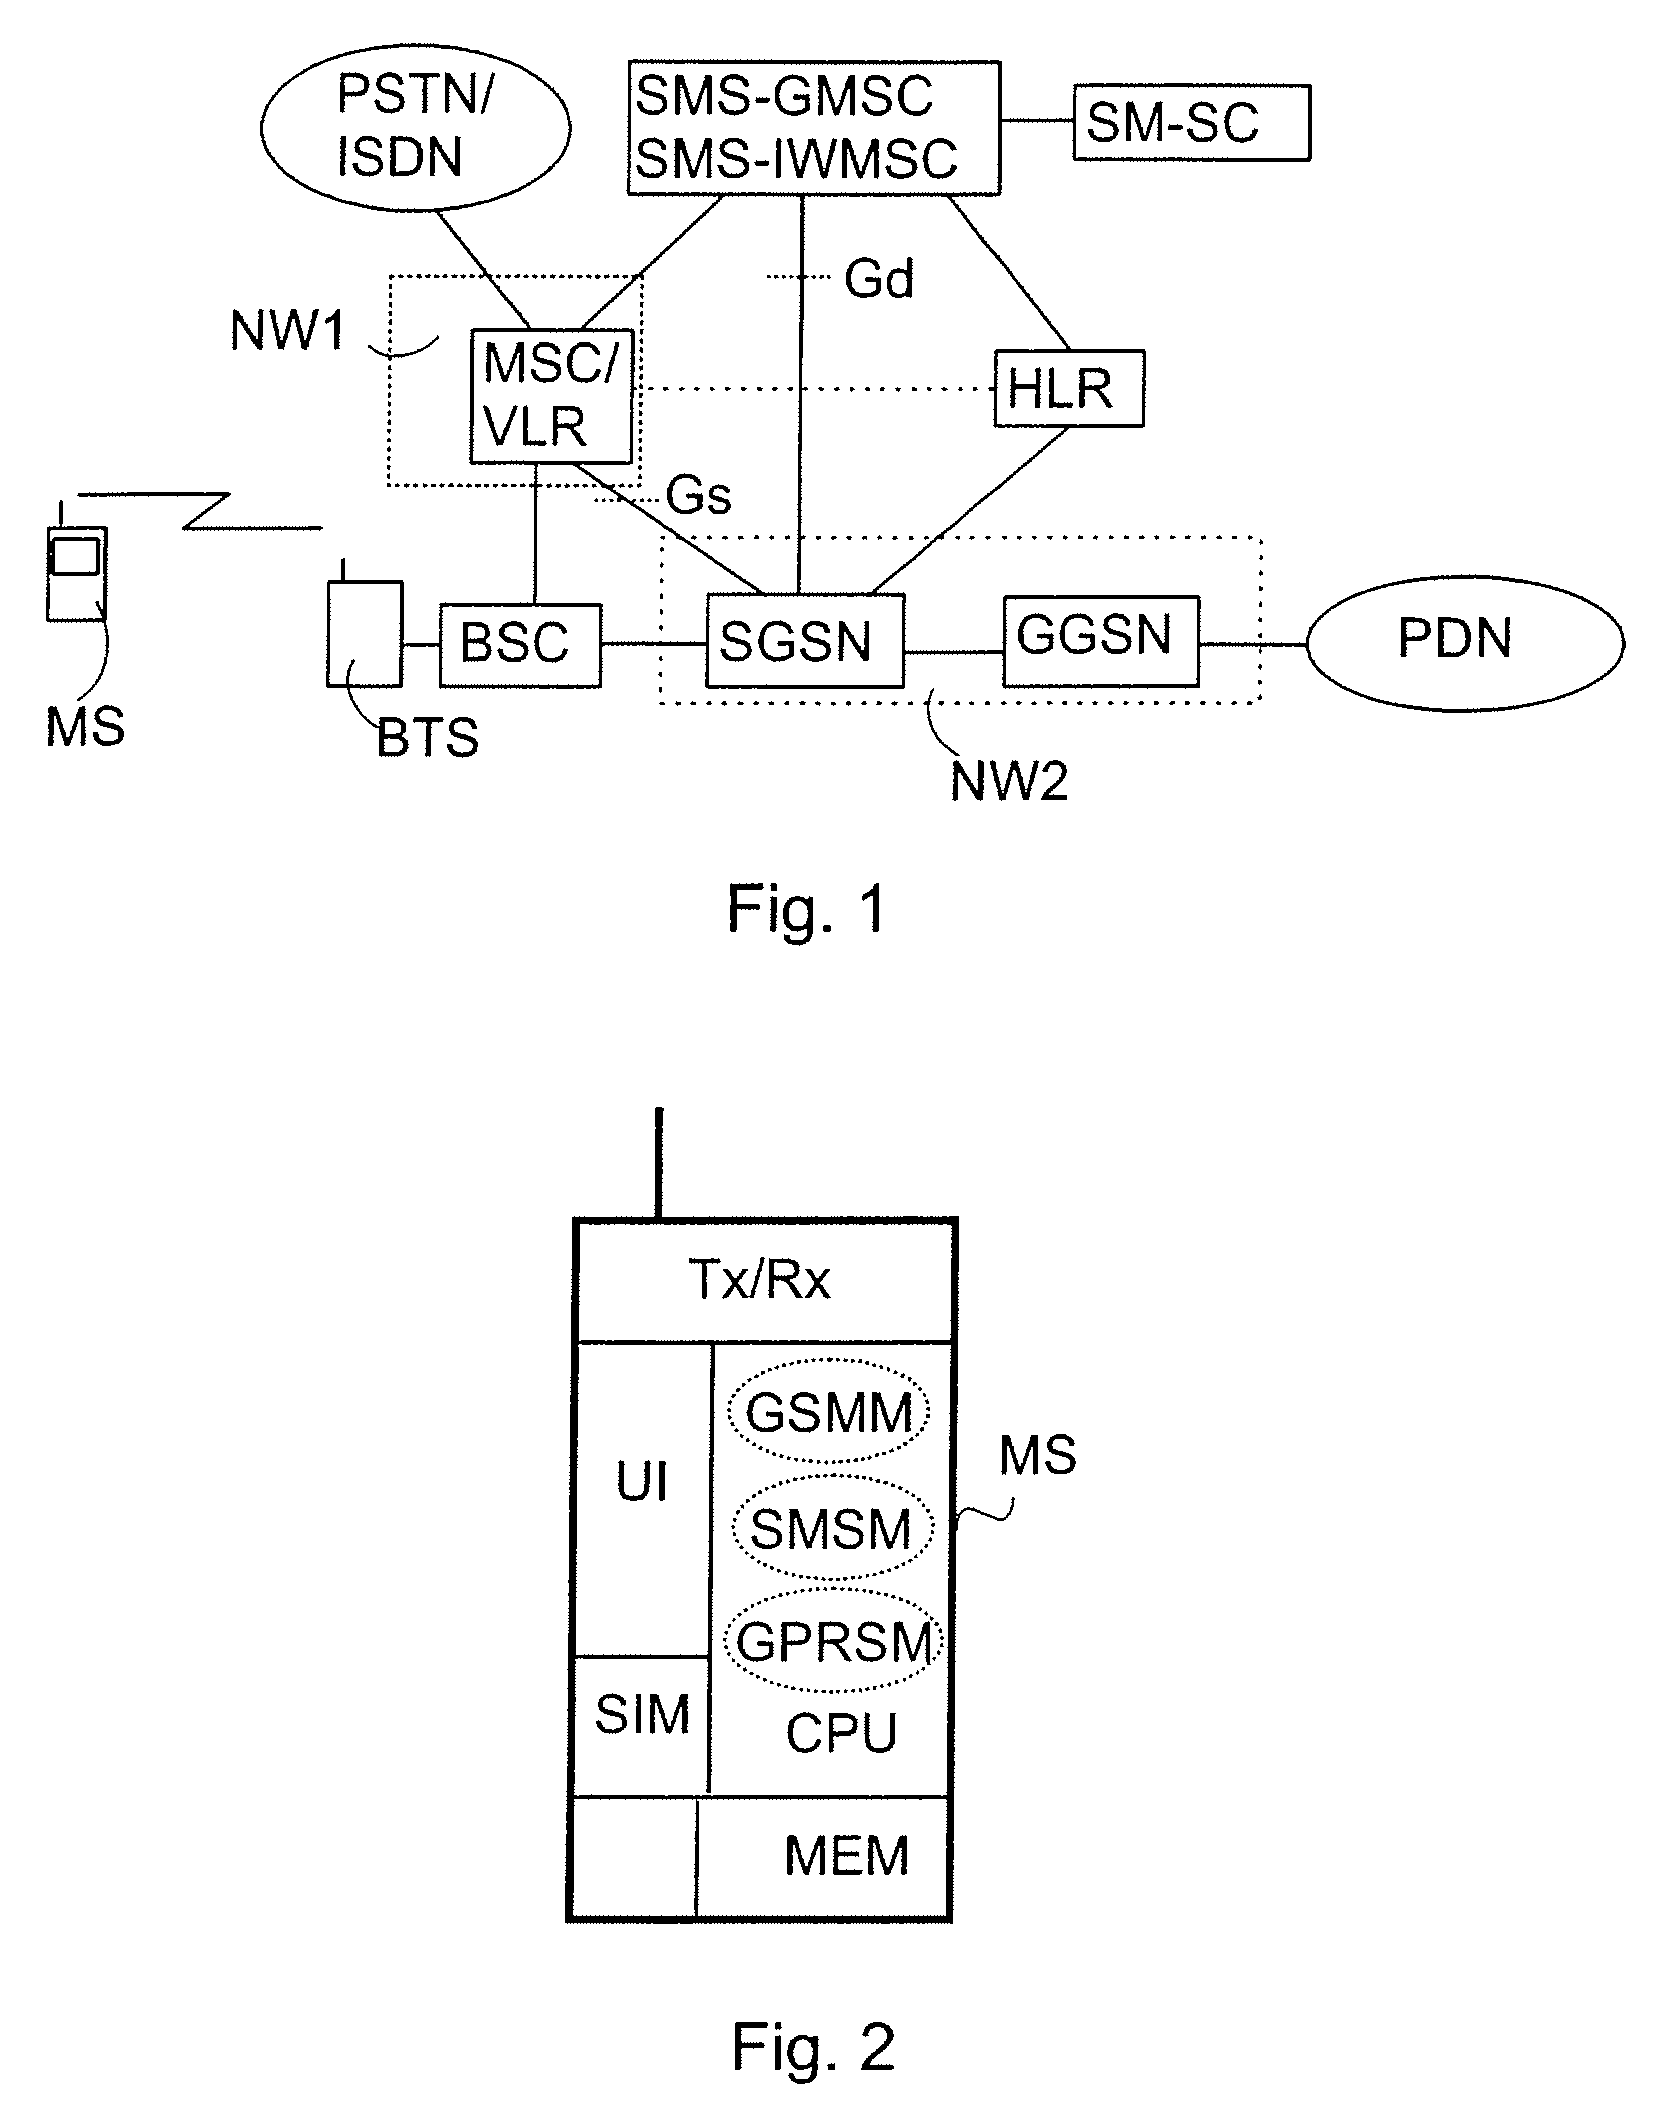 Transmitting messages in telecommunications system comprising a packet radio network